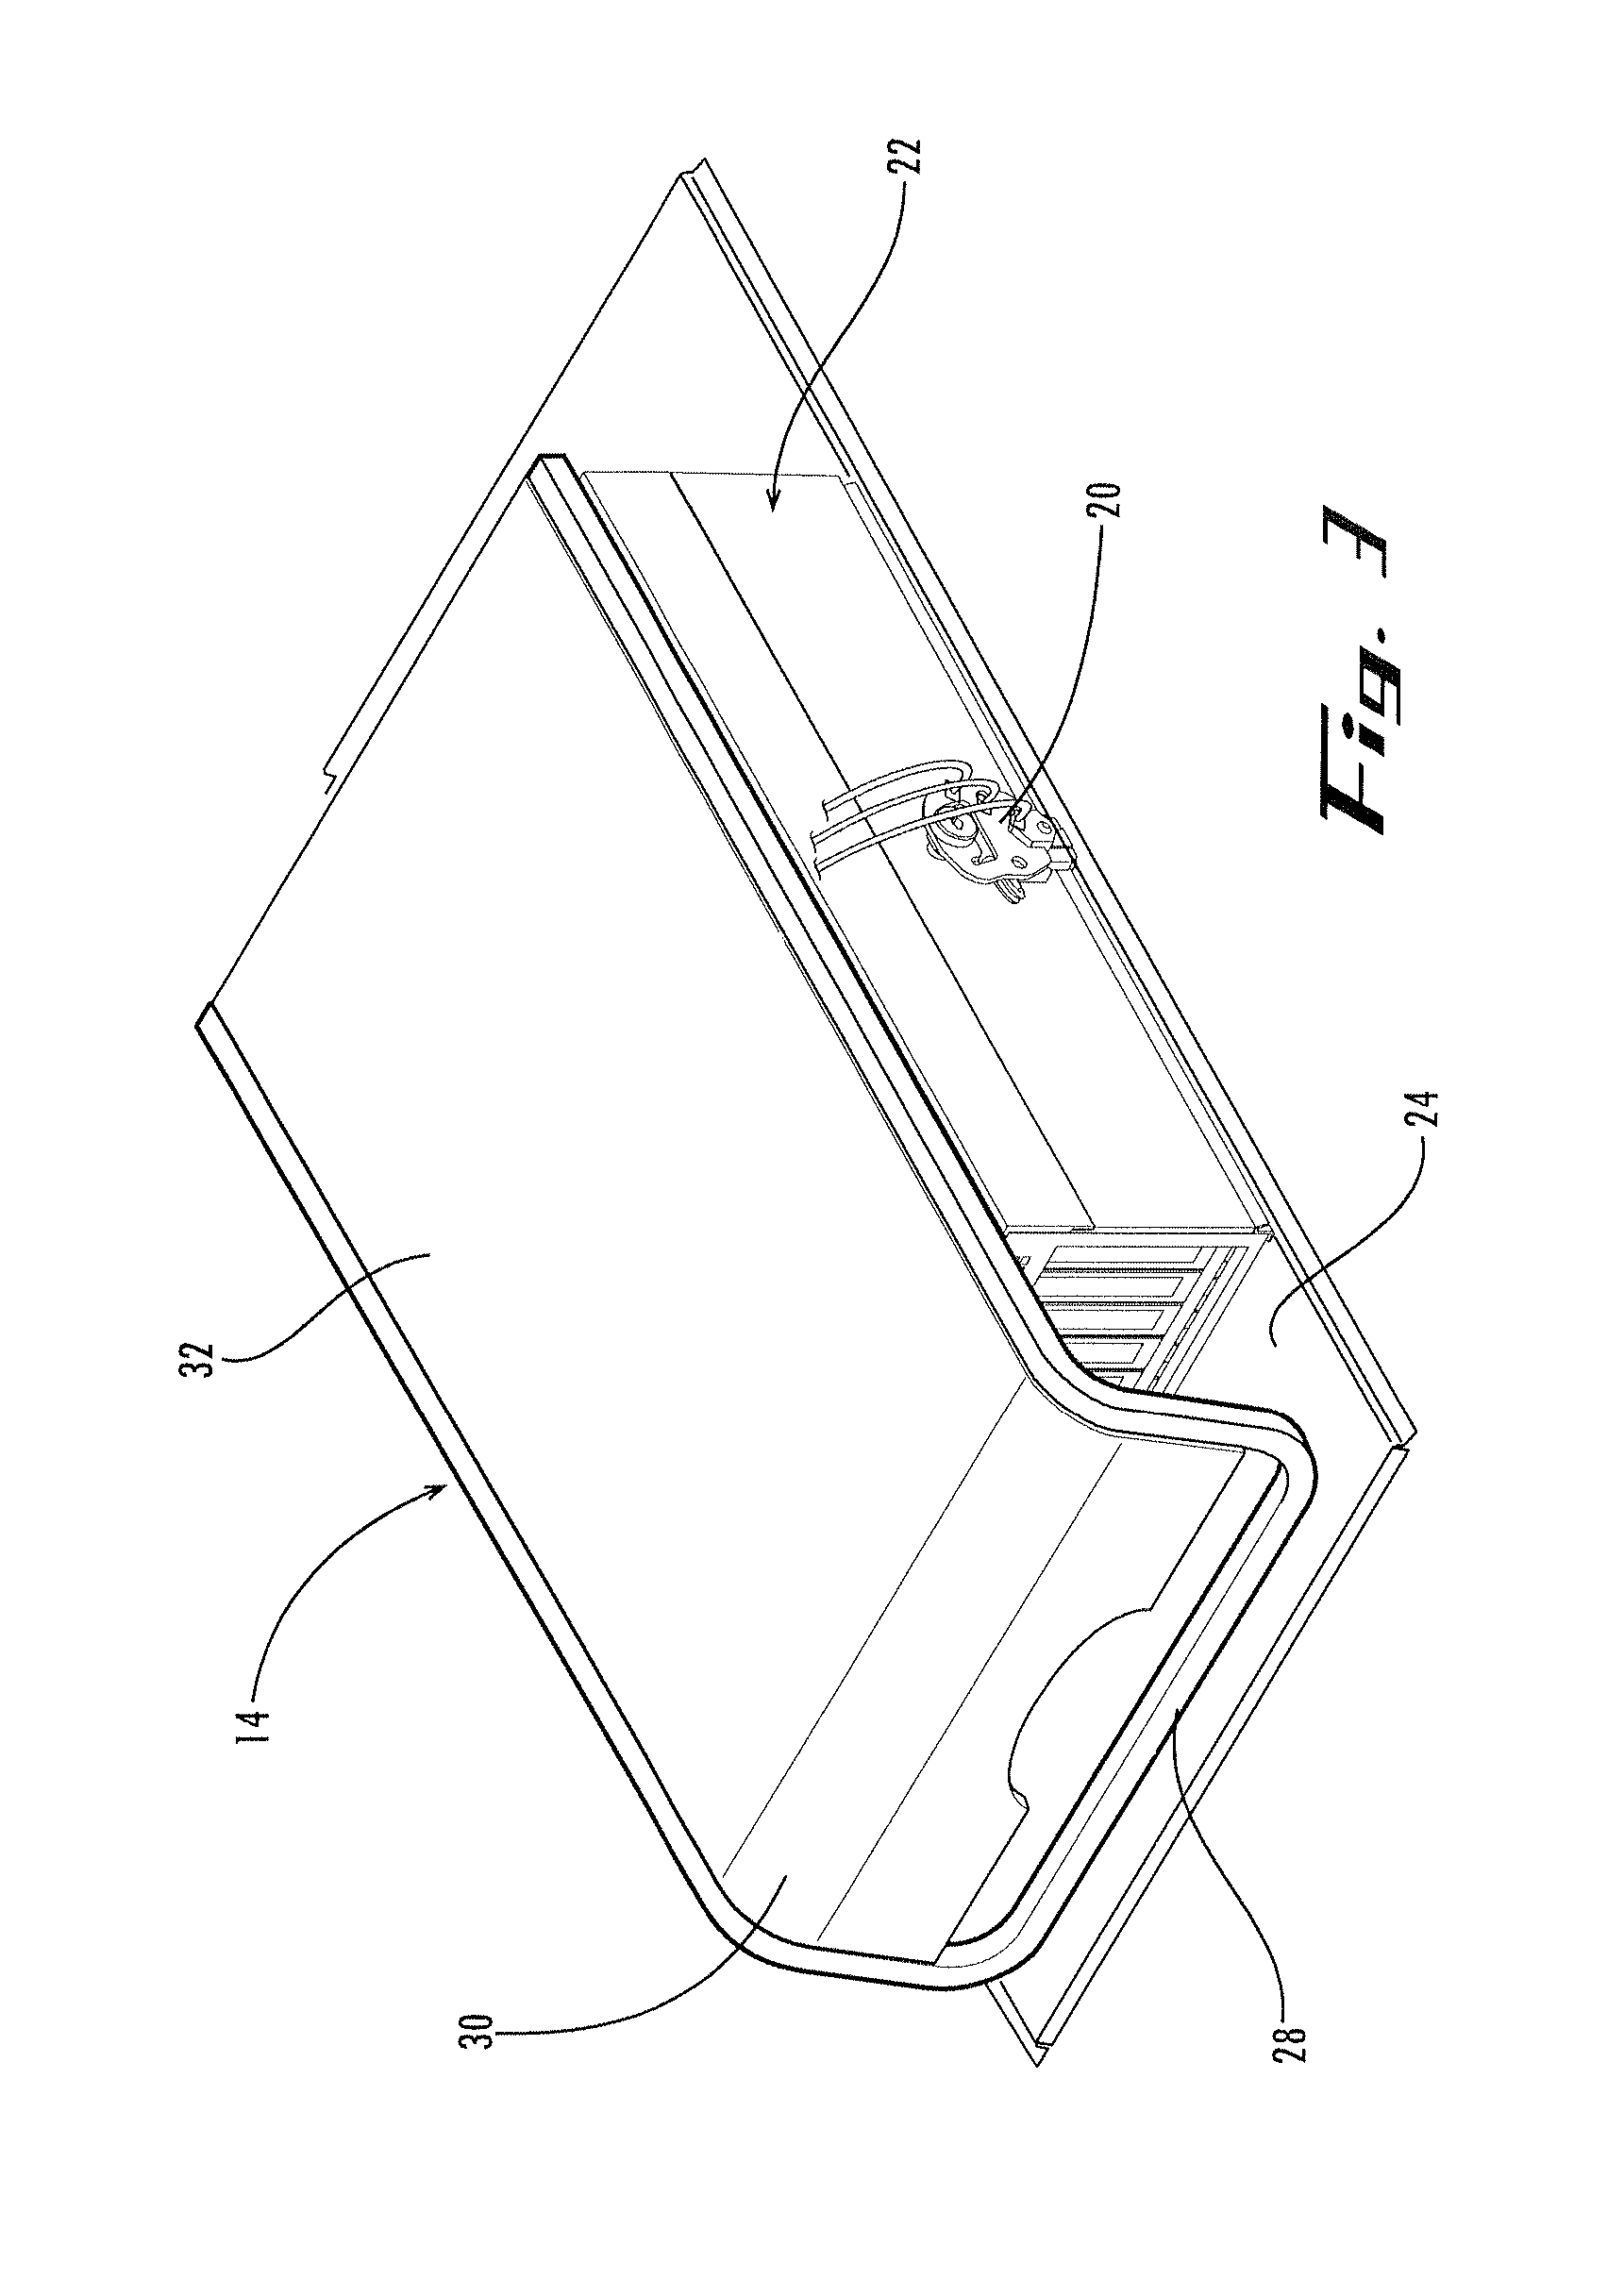 Mobile computing device with modular expansion features